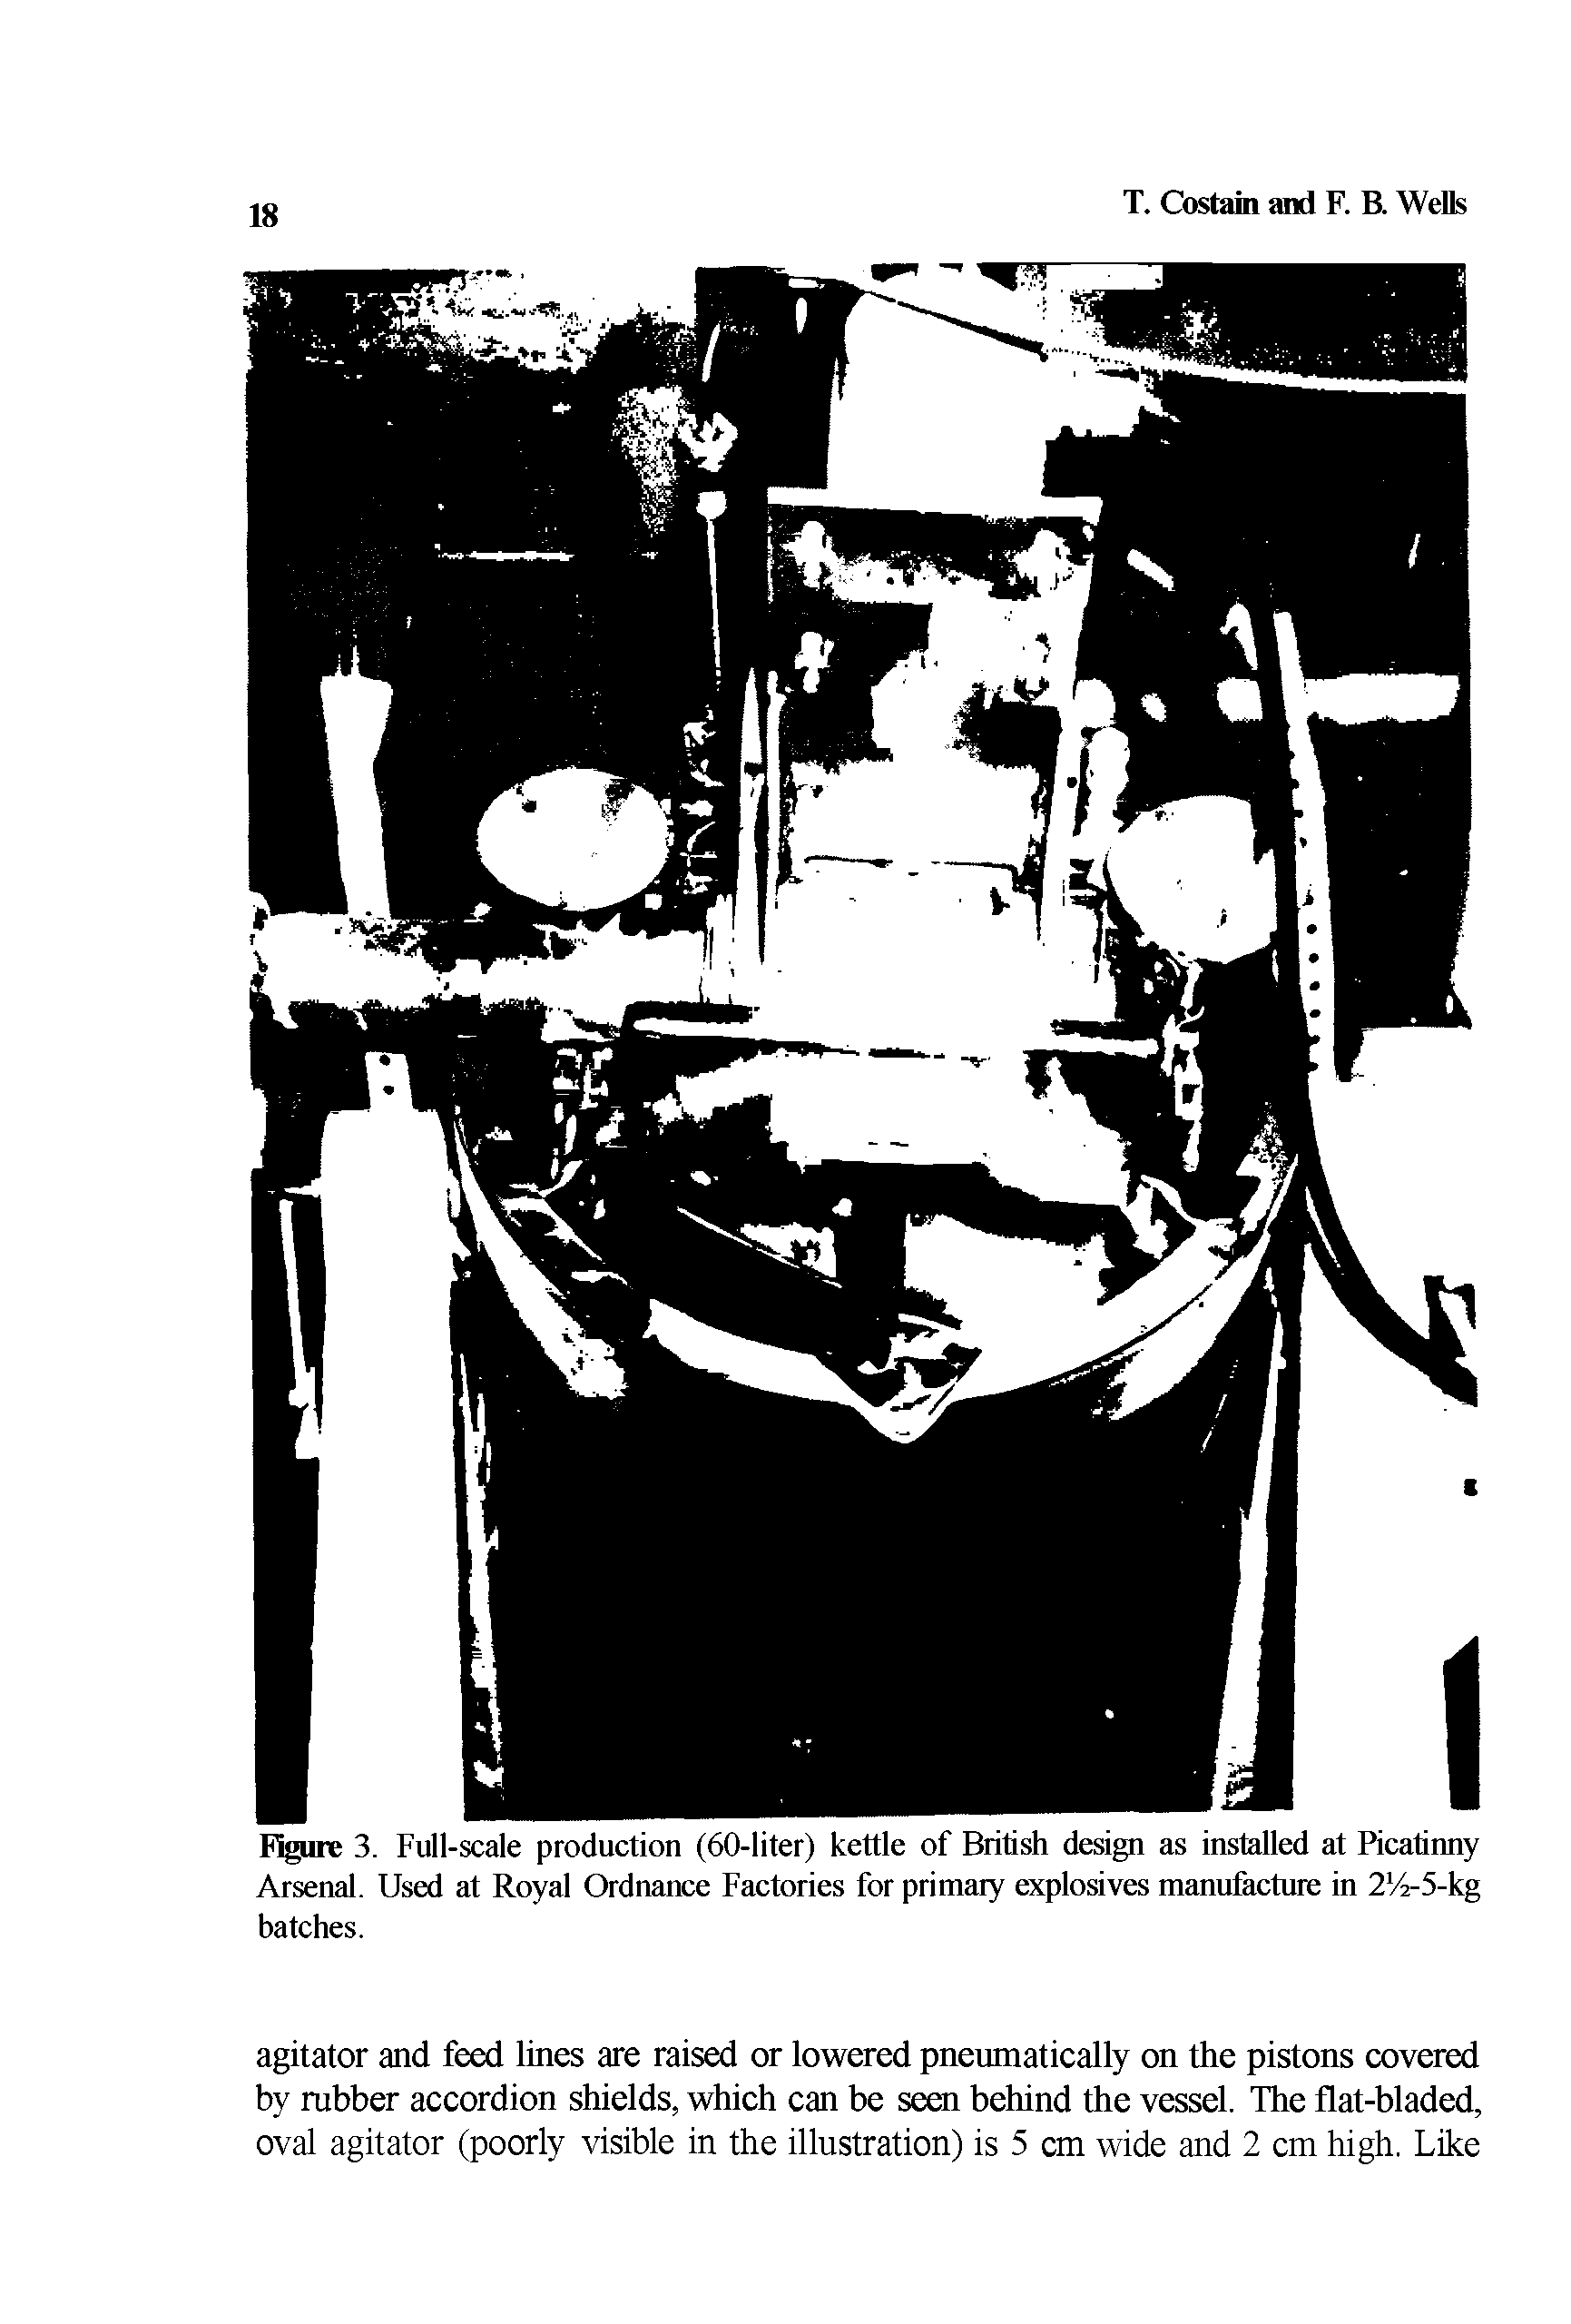 Figure 3. Full-scale production (60-liter) kettle of British design as installed at Picatiimy Arsenal. Used at Royal Ordnance Factories for primary explosives manufacture in 2%-5-kg batches.